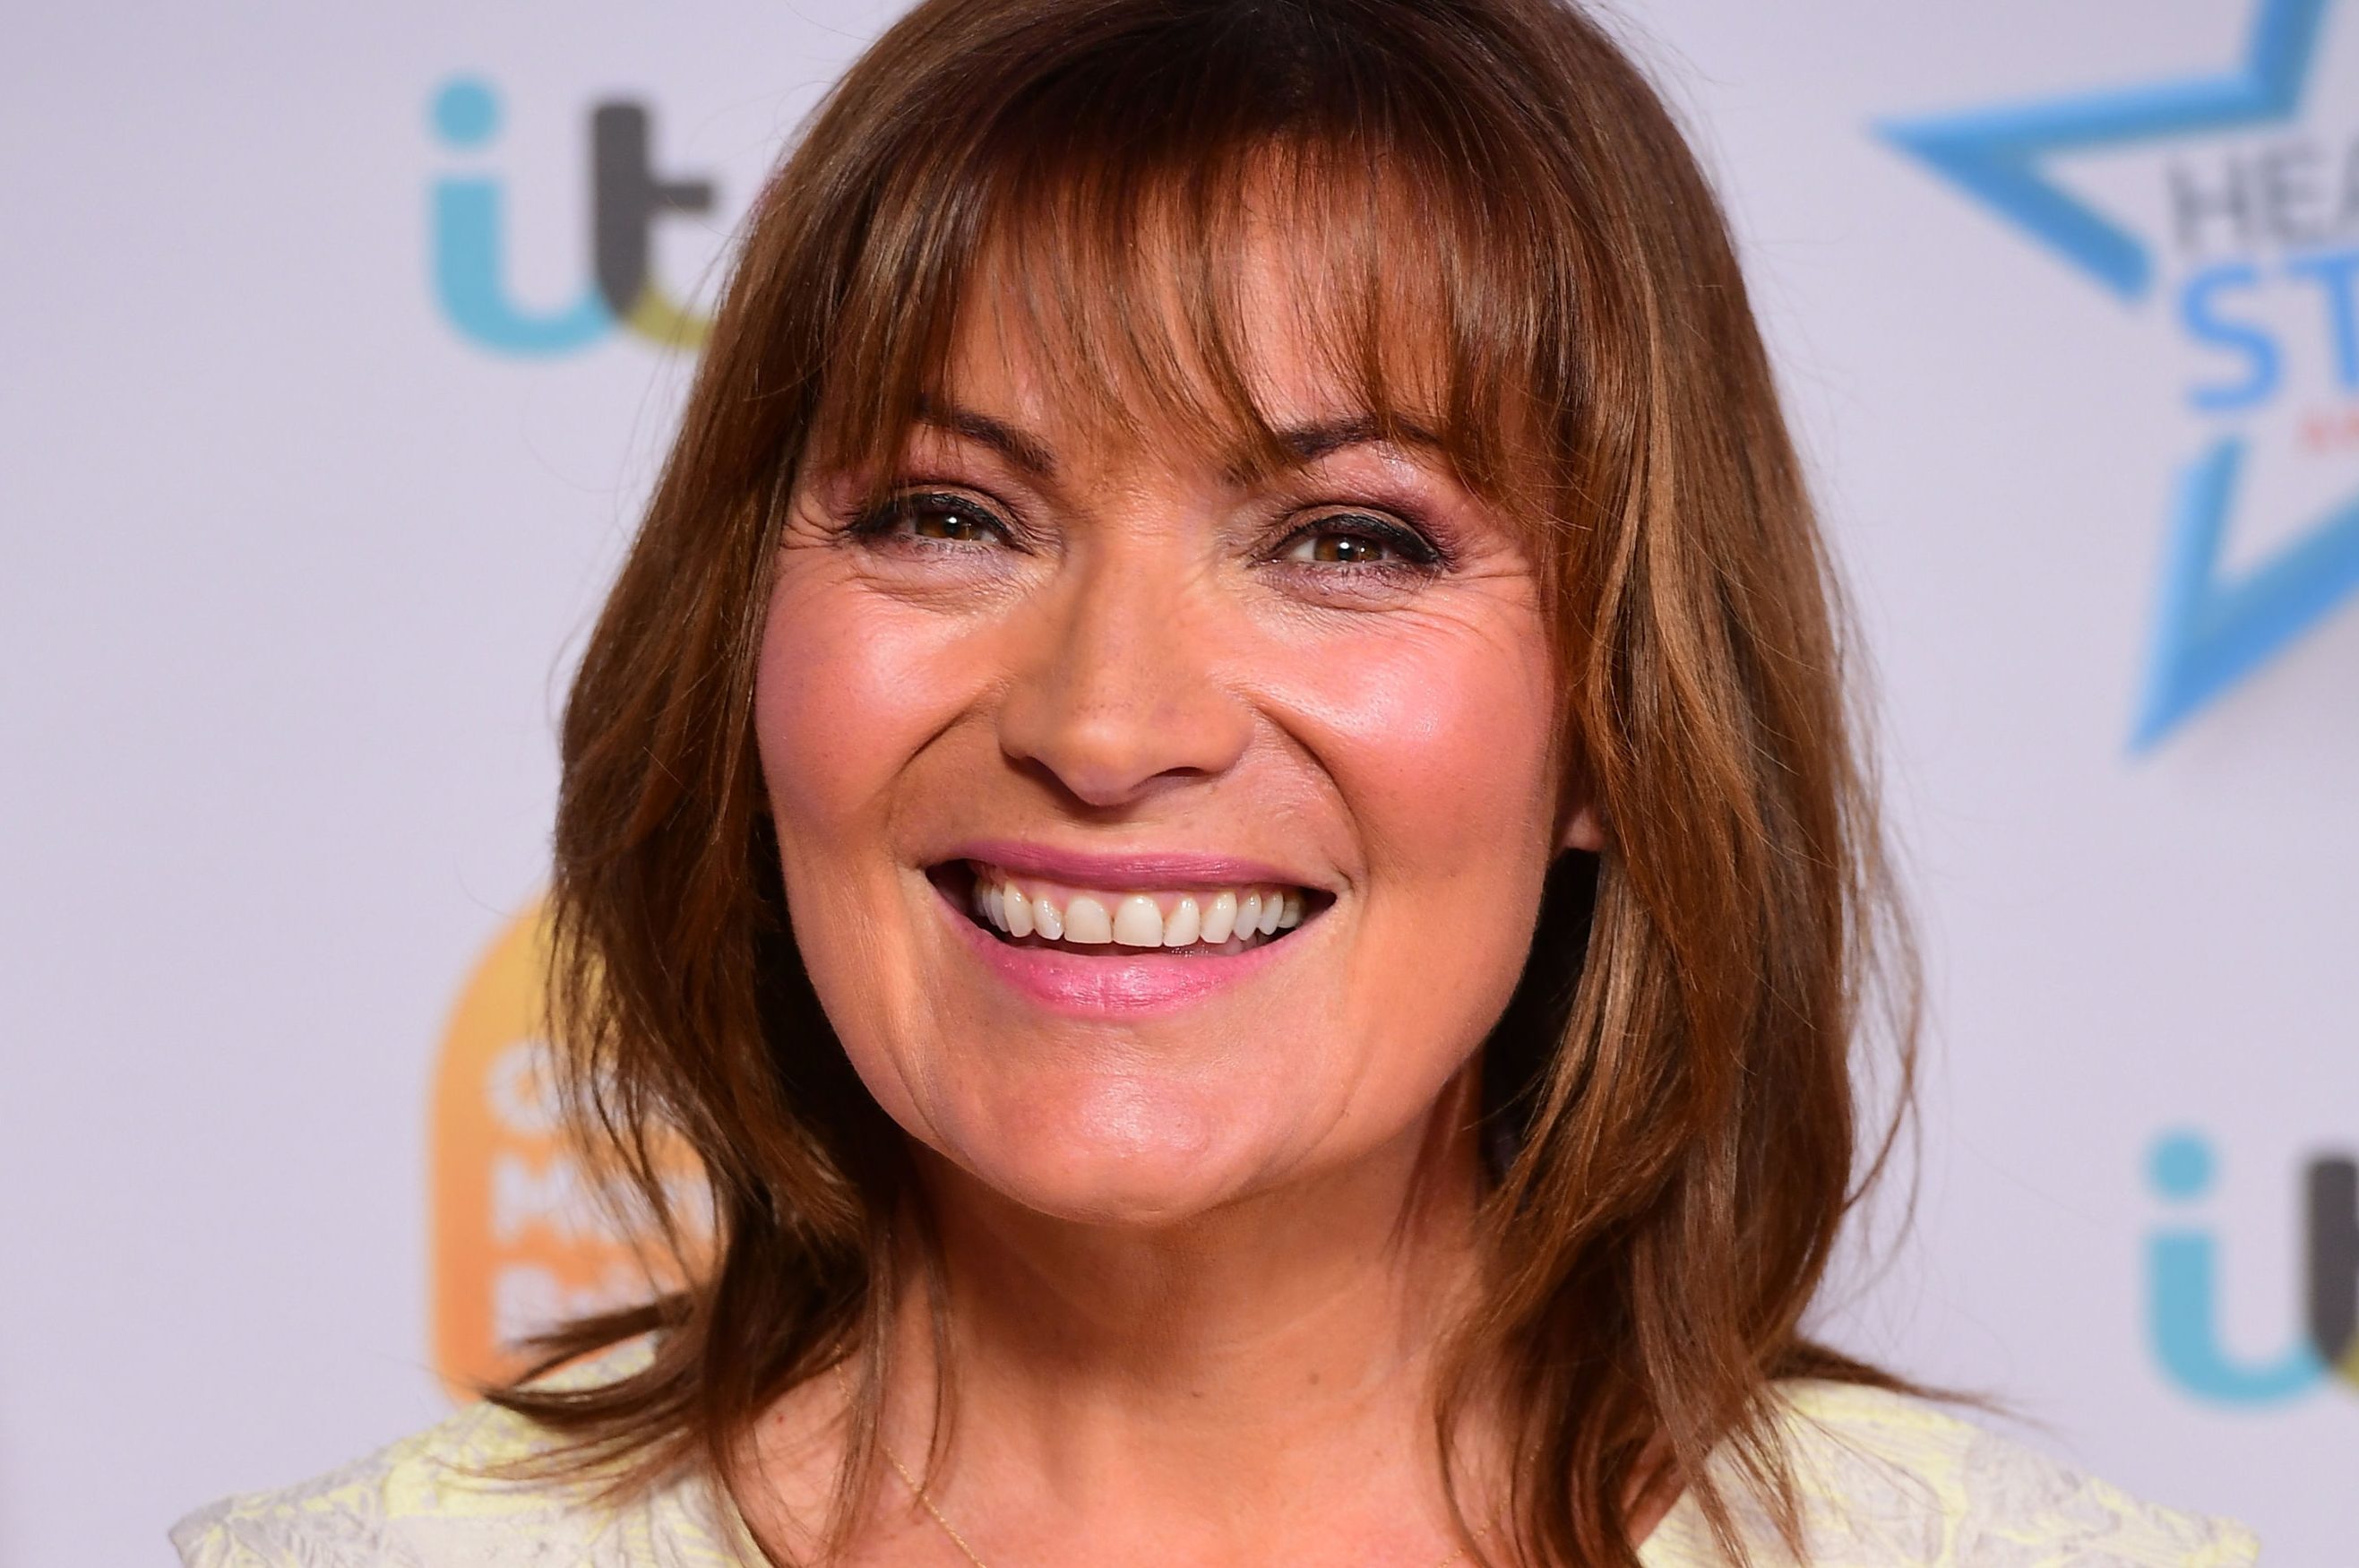 Lorraine Kelly says she's never had surgery